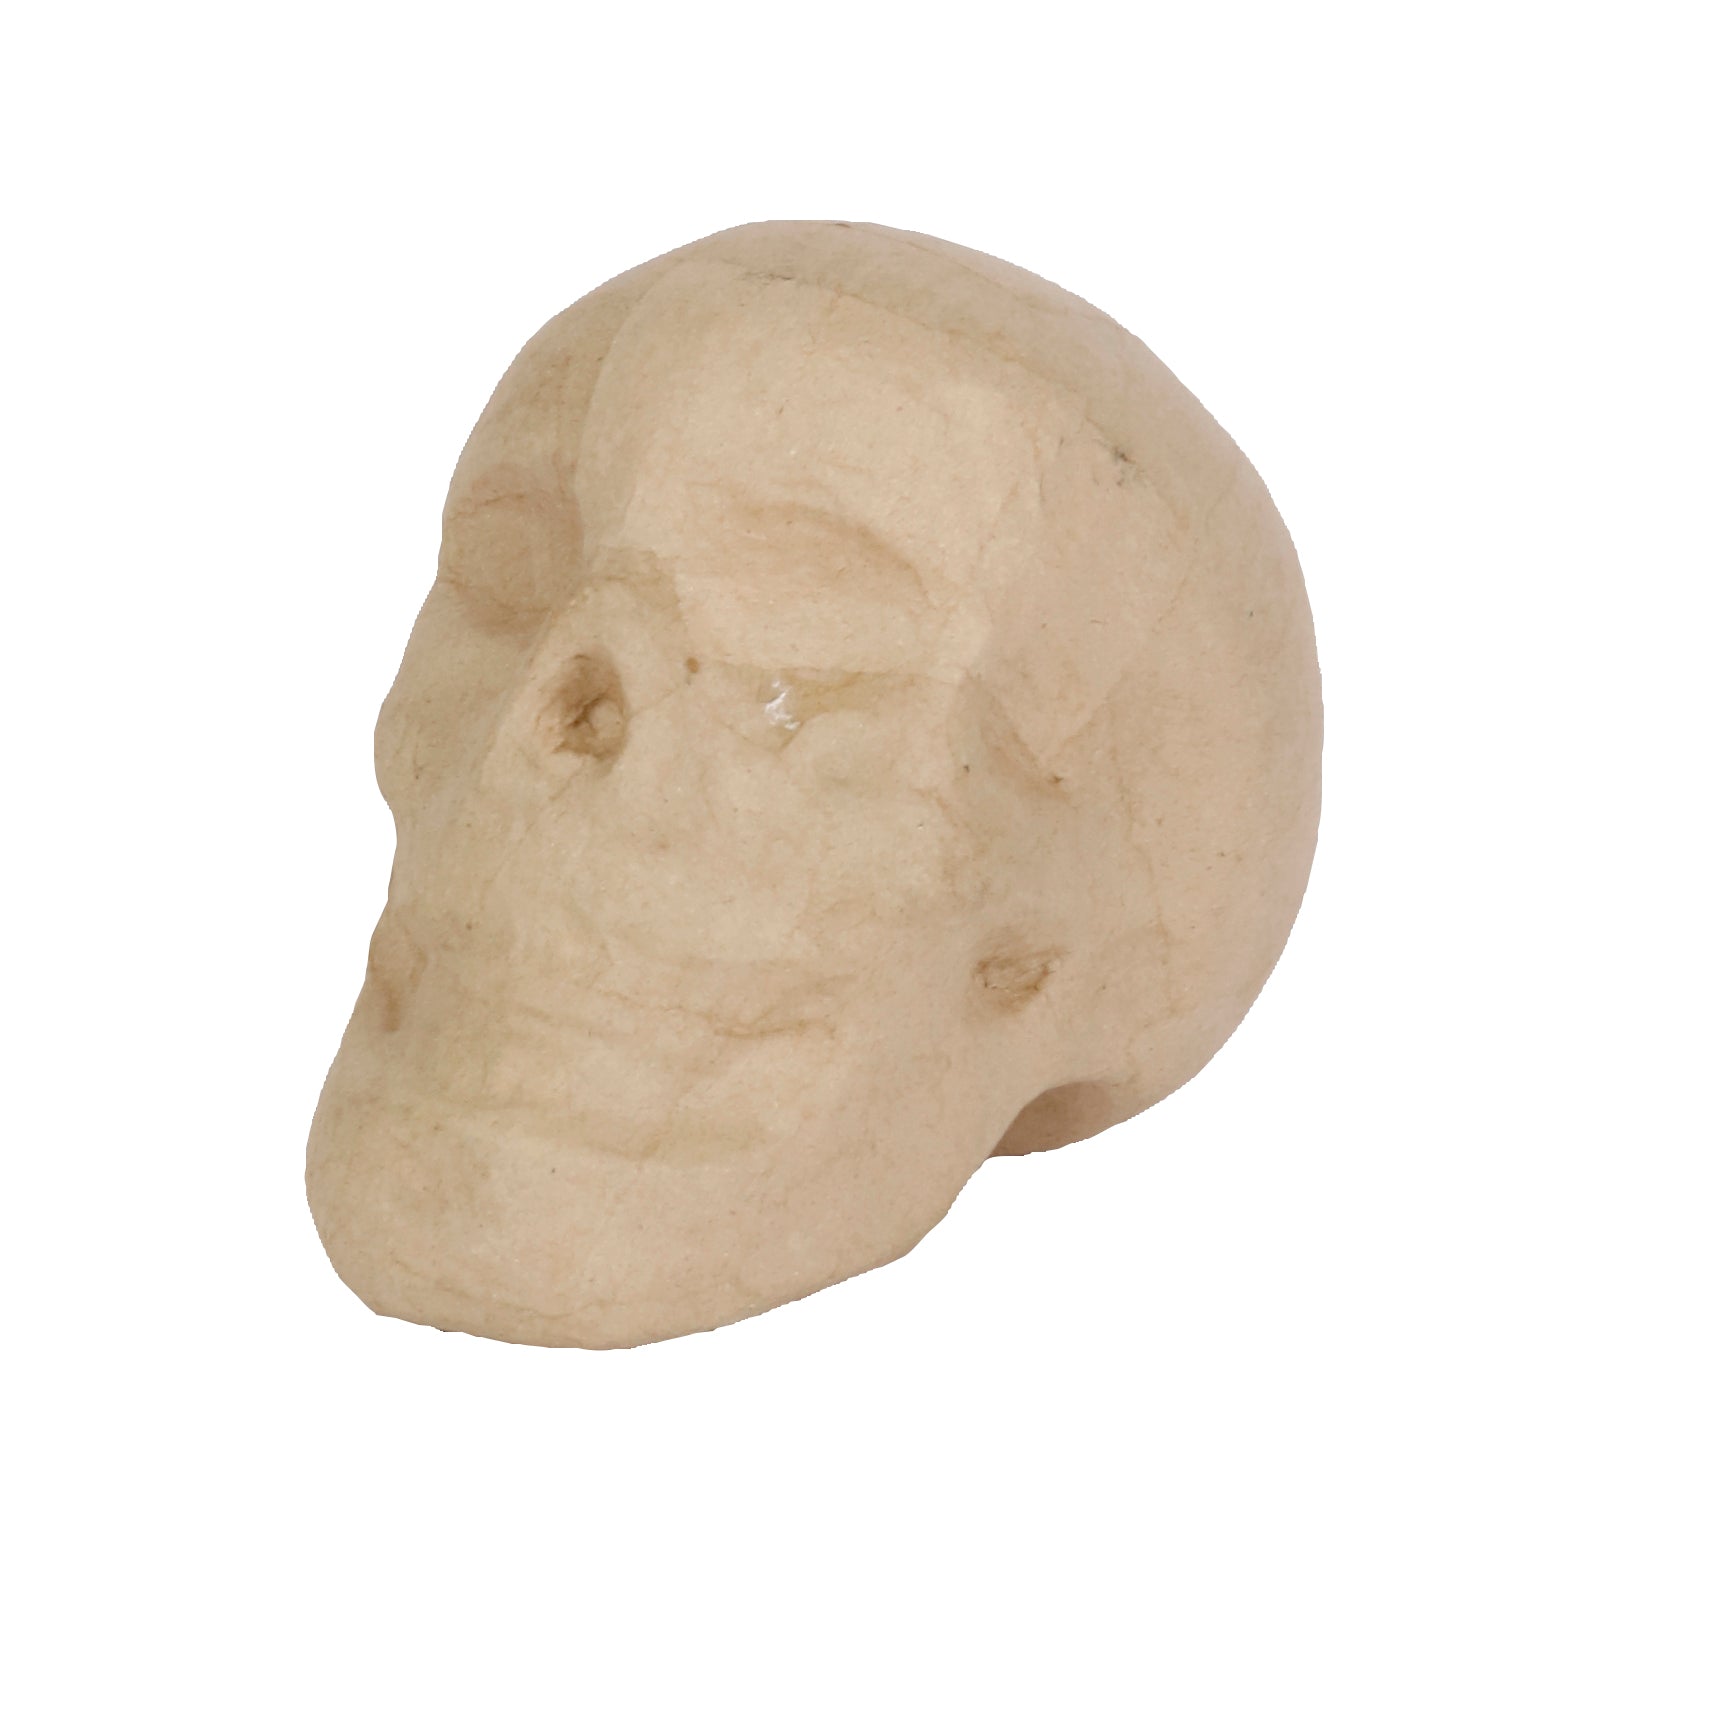 DECOPATCH Objects:Halloween Skull-Small Default Title